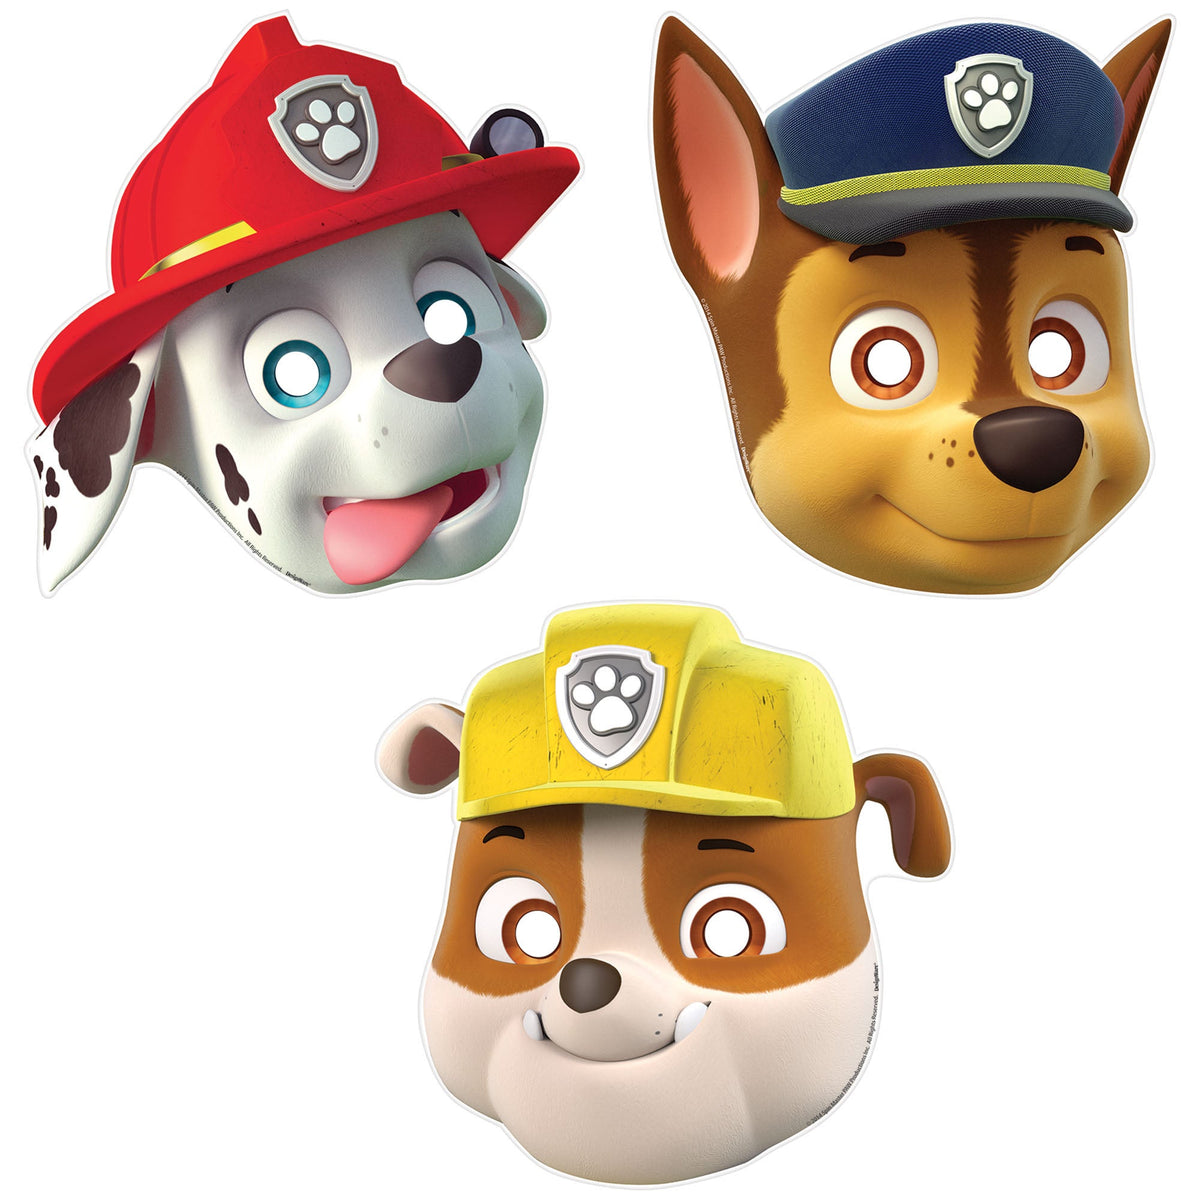 Paw Patrol package of 8 Paper Character Masks